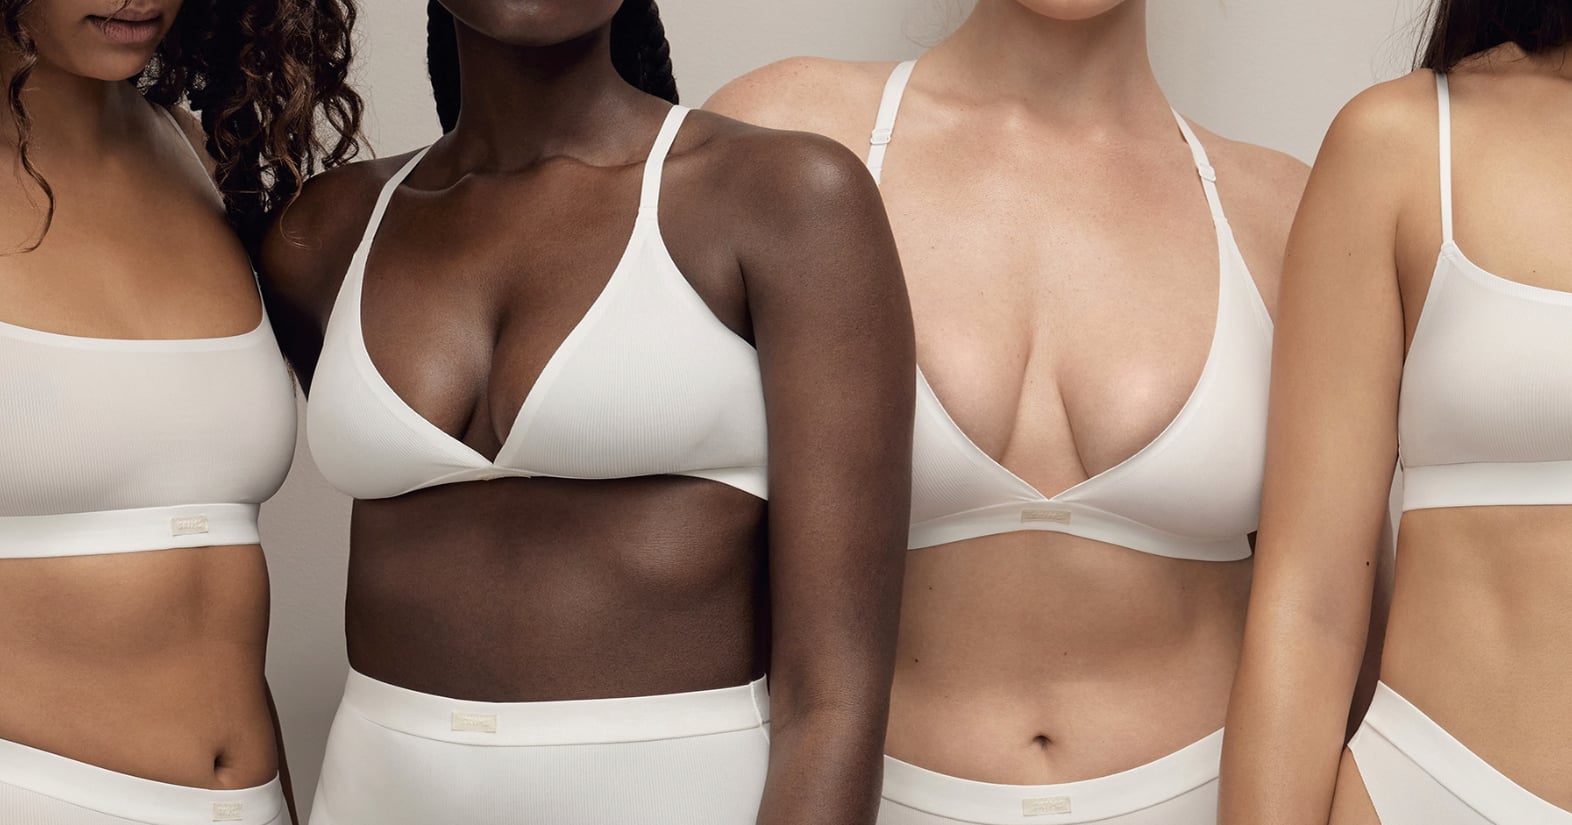 Hundreds Of Big-Breasted People Swear They Wear This Bra Literally Every Day